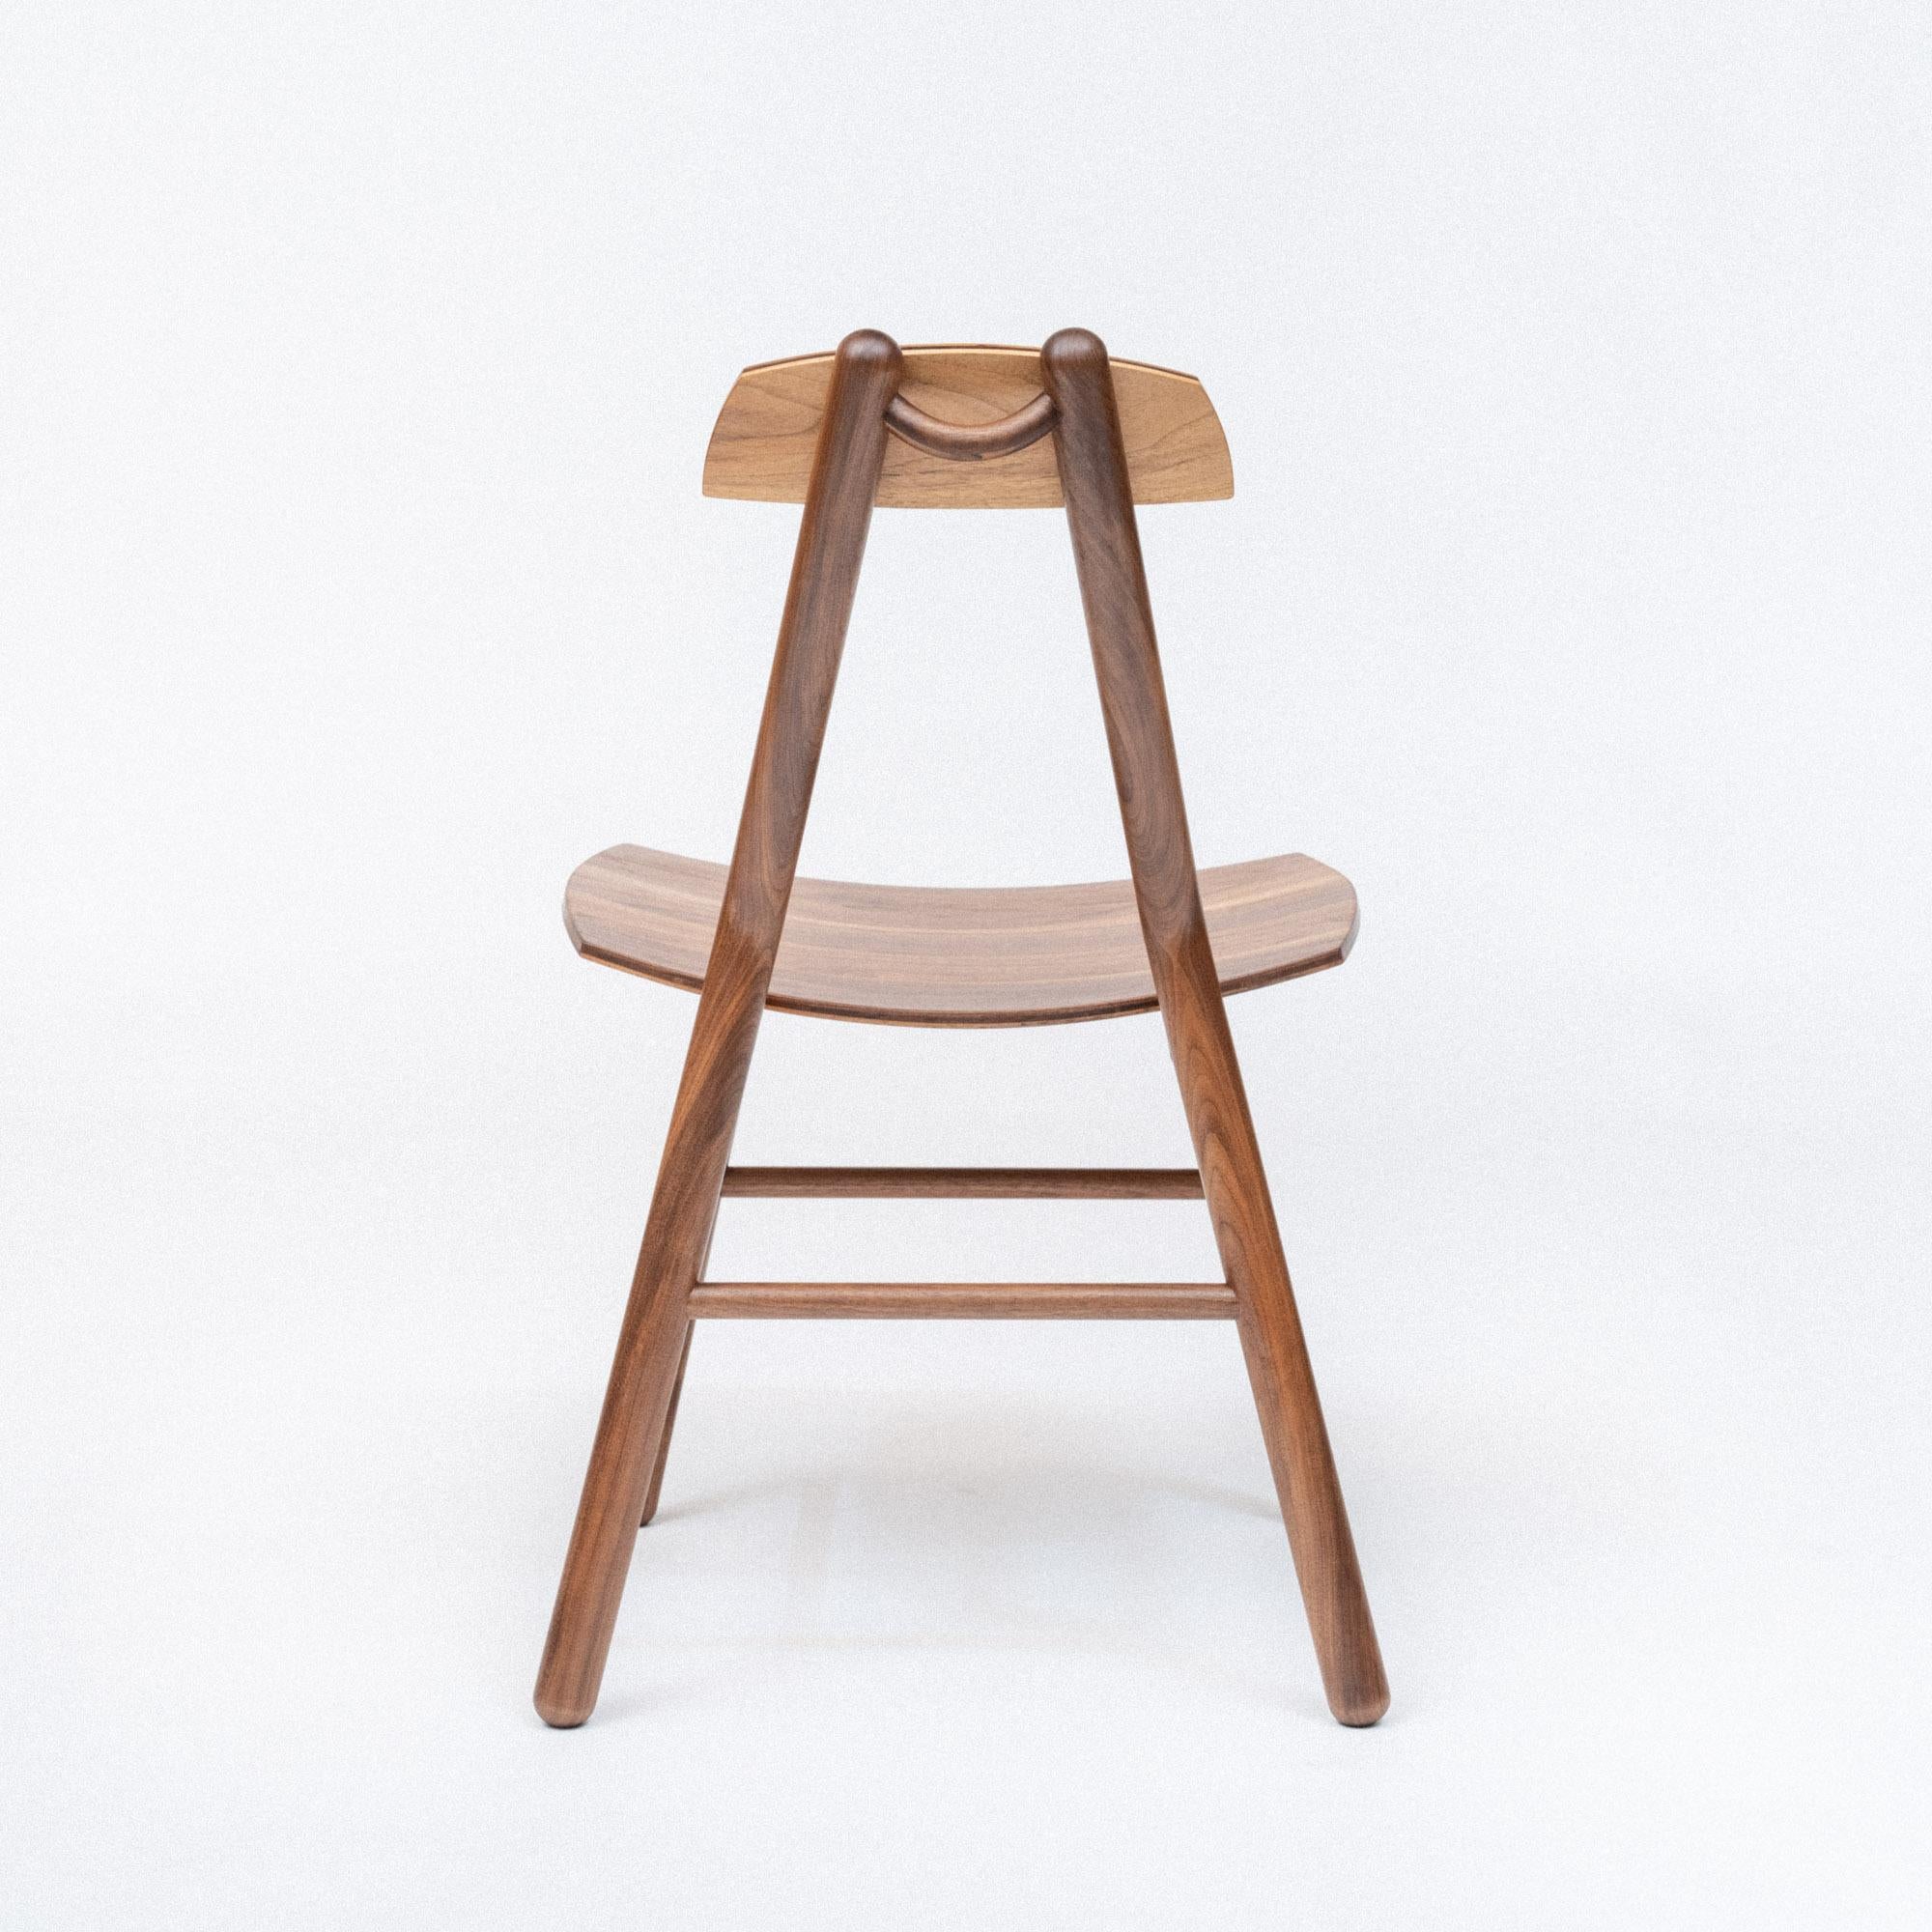 The Hiro Chair is a contemporary, minimal design made with traditional methods and solid wood joinery. The seat and back are fabricated from custom milled hardwood with a specially pressed curve hugging the occupant for a comfortable long term sit.